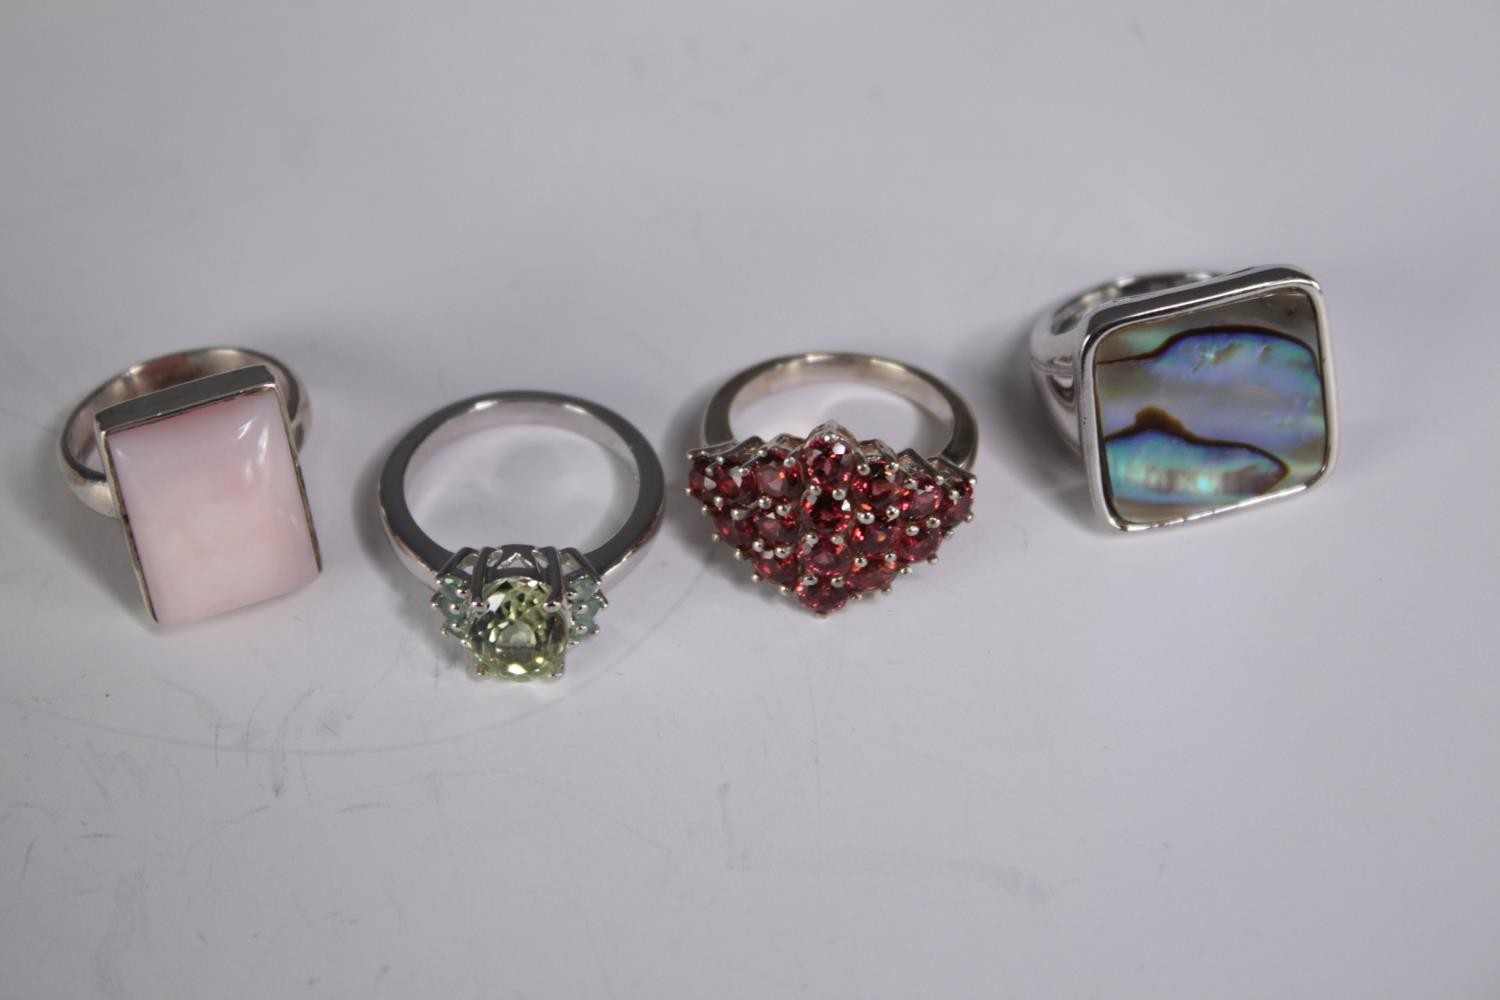 A collection of ten silver gem-set rings of various designs. Set with rose quartz, Turquoise, - Image 4 of 4